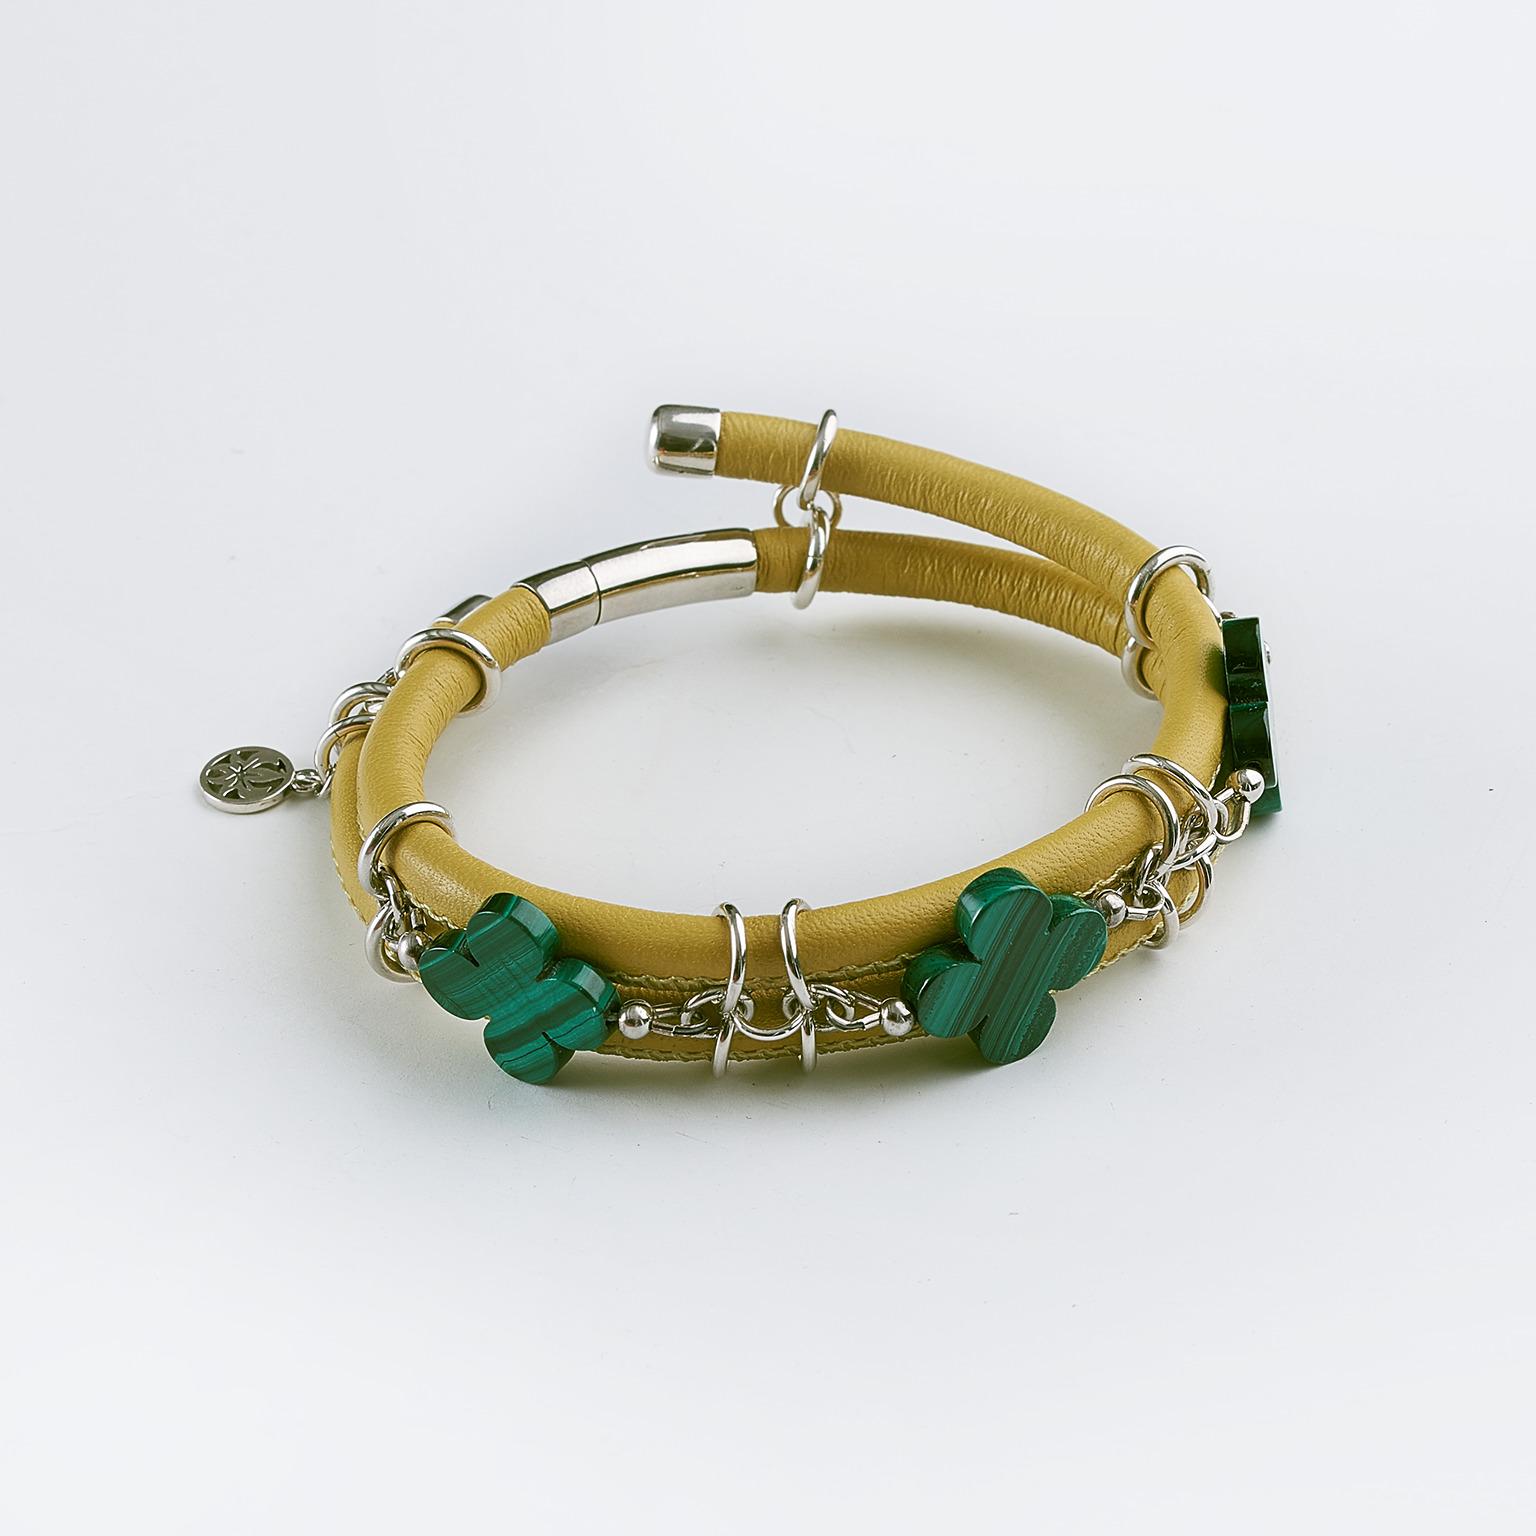 The yellow stitched leather double bangle bracelet made with three malachite clovers cut gemstones and connecting by silver links and a barrel lock. 

Length: 8.0 in ( 21.0 cm )

Malachite clover cut 0.7 x 0.7 in ( 17.0 x 17.0 mm )   
Yellow